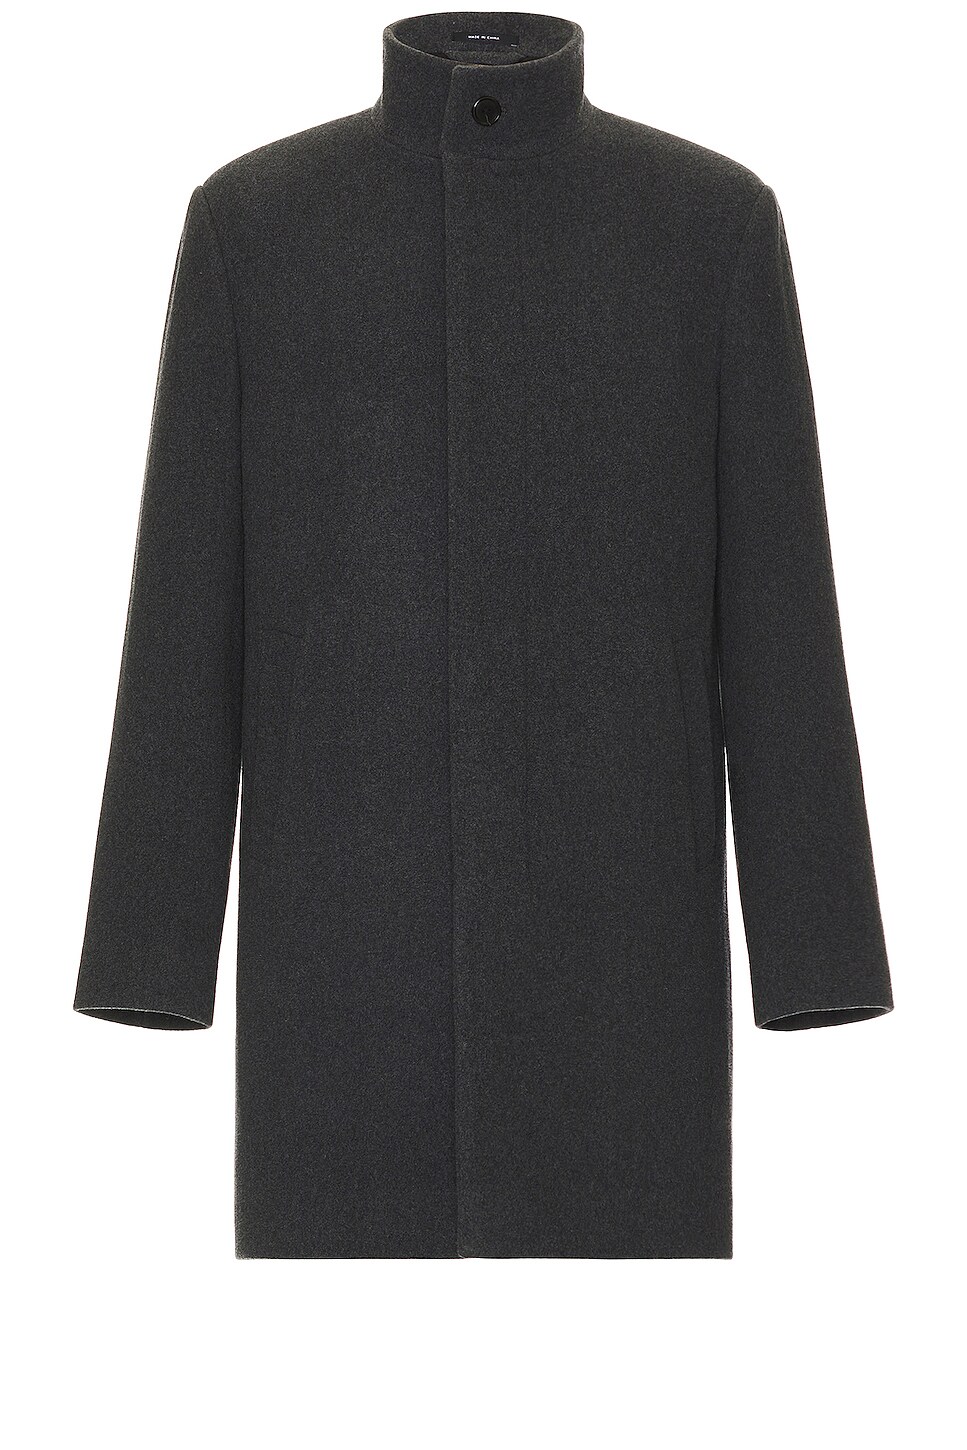 Image 1 of Club Monaco Test Funnel Neck Coat in Charcoal